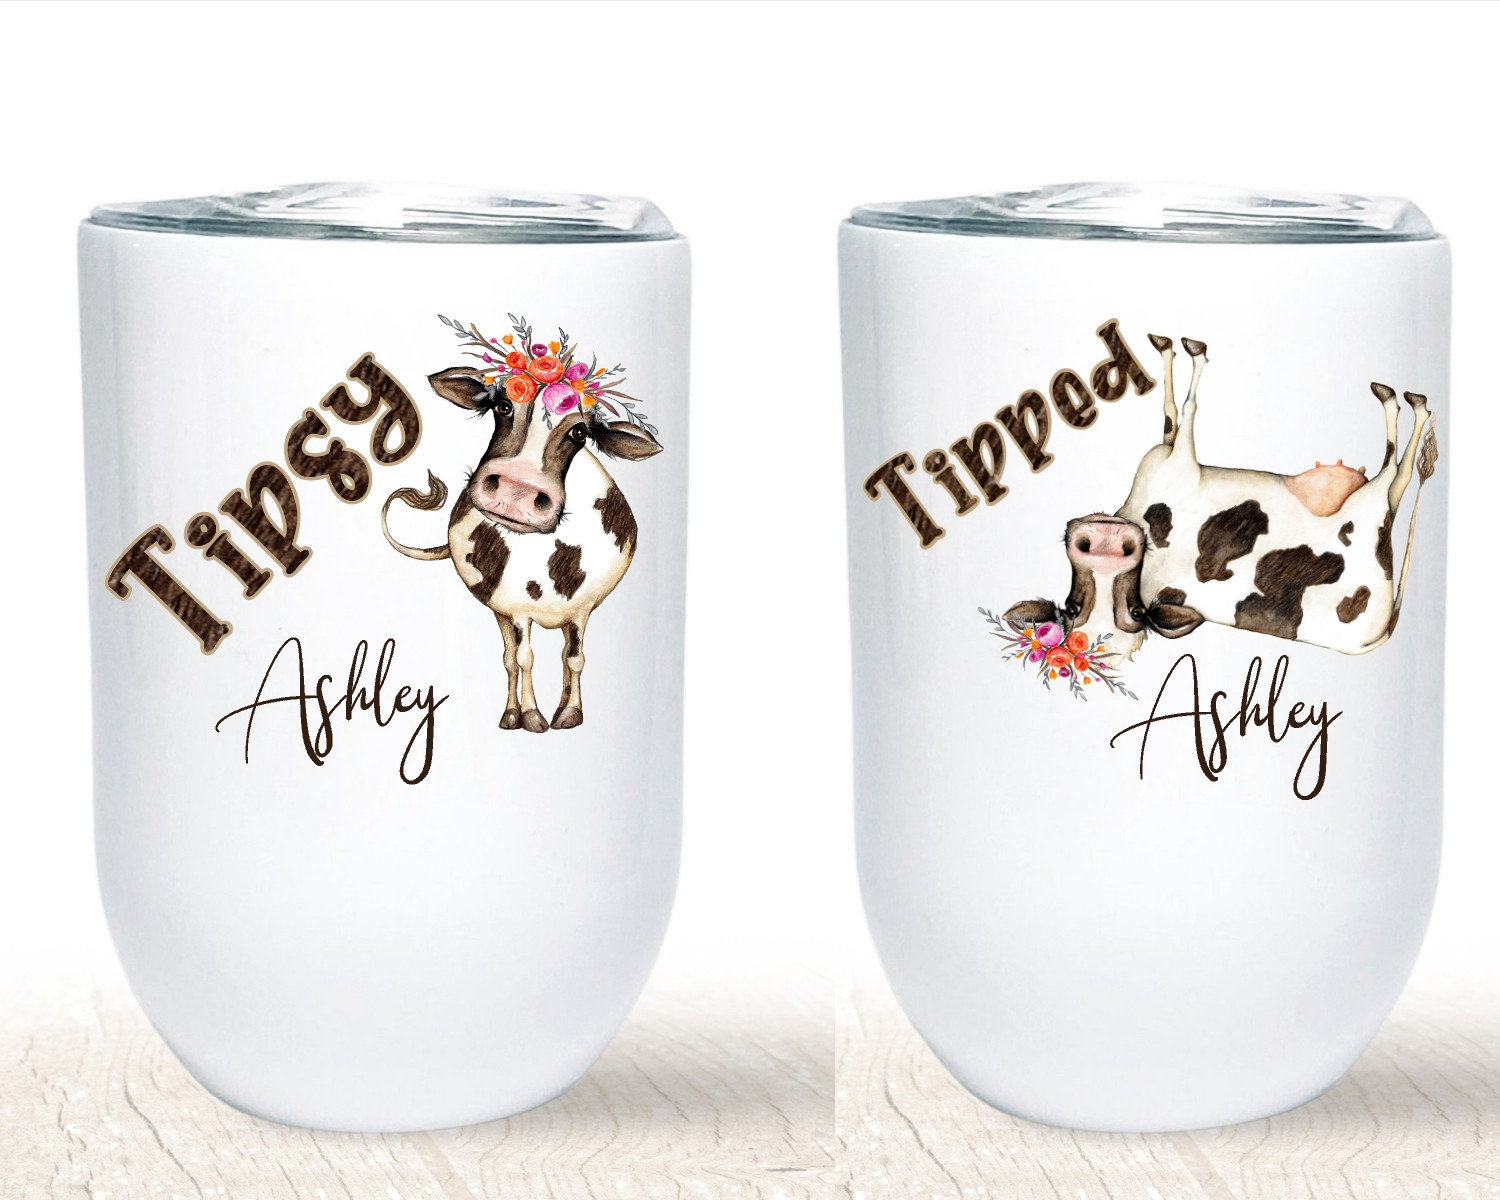 Drinking Divas 'Tipsy' and 'Tipped' Wine Glasses - Set of 2 Stemless Non-Rolling, Flat Bottom 15oz Tumblers with Sayings | Cute & Funny Cow Gifts